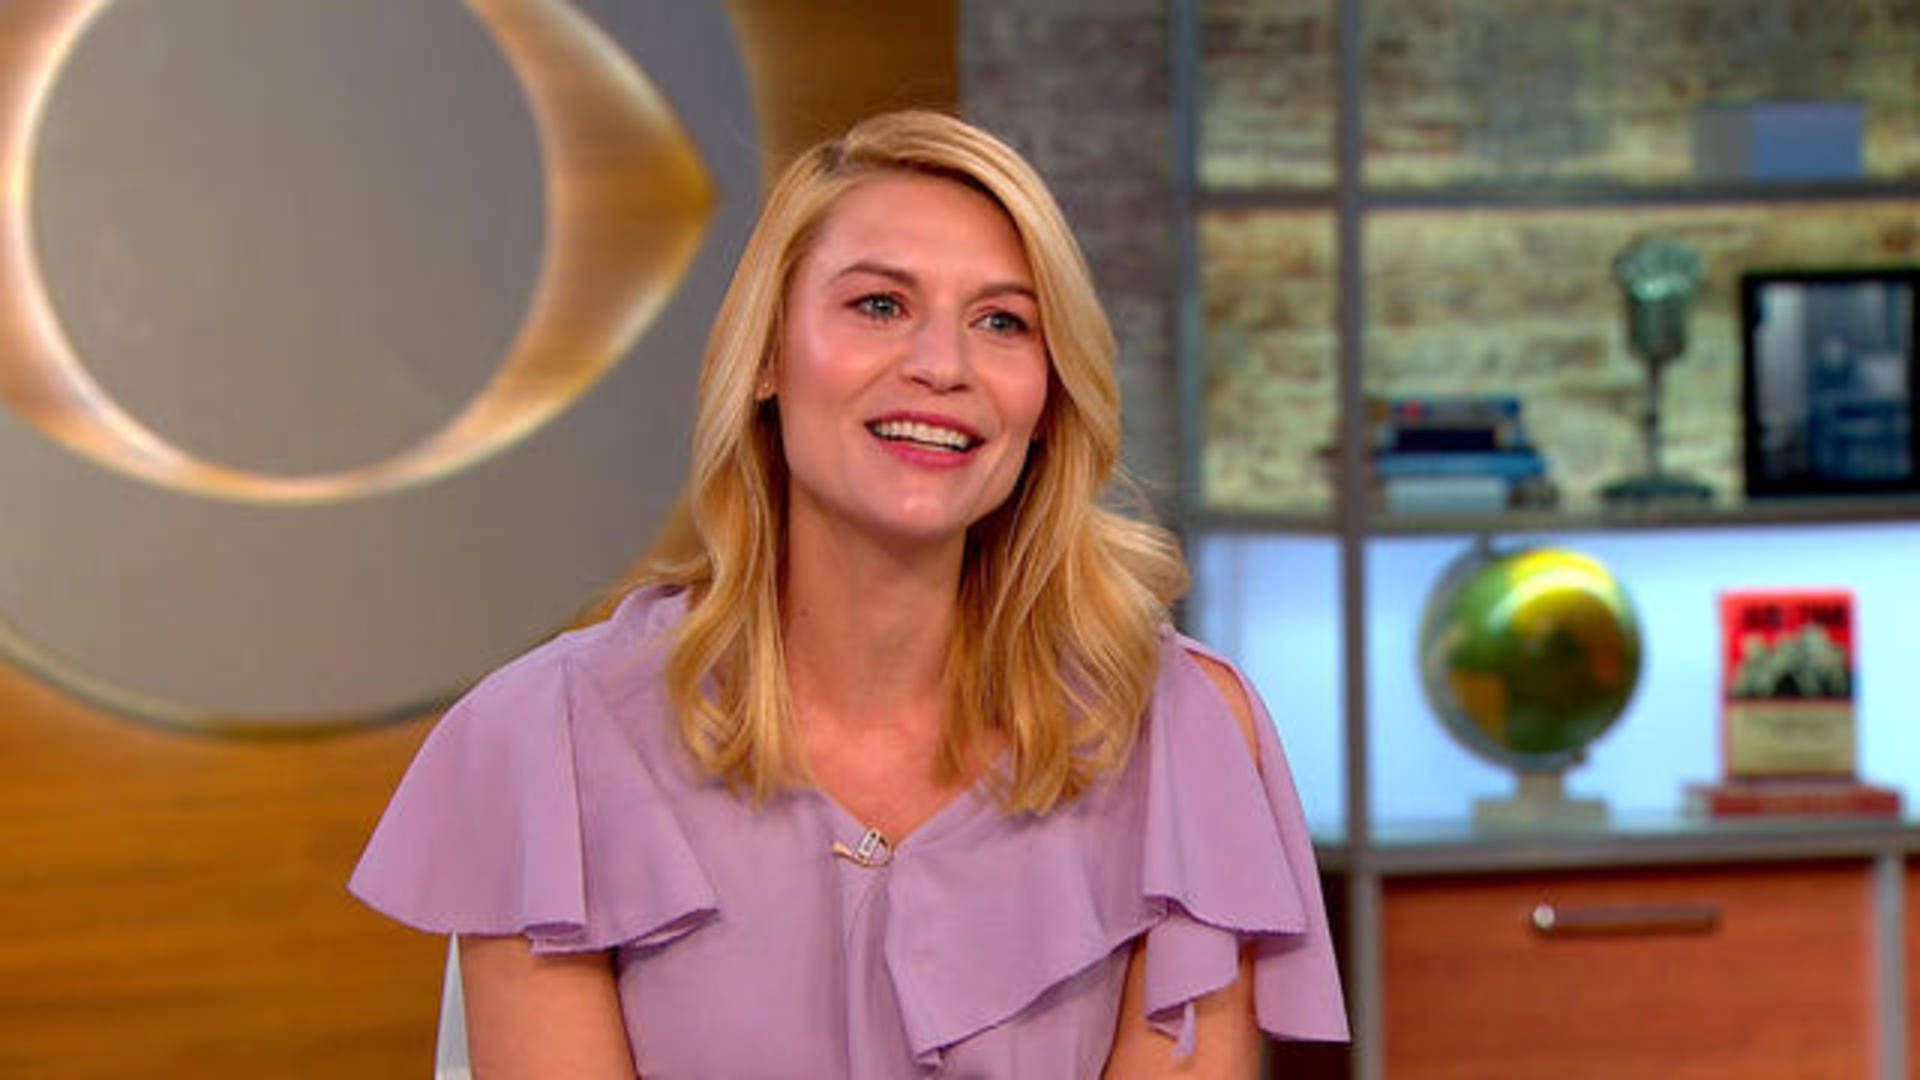 Claire Danes On Her 'Homeland Run': 'I'm Filled With Gratitude' : NPR